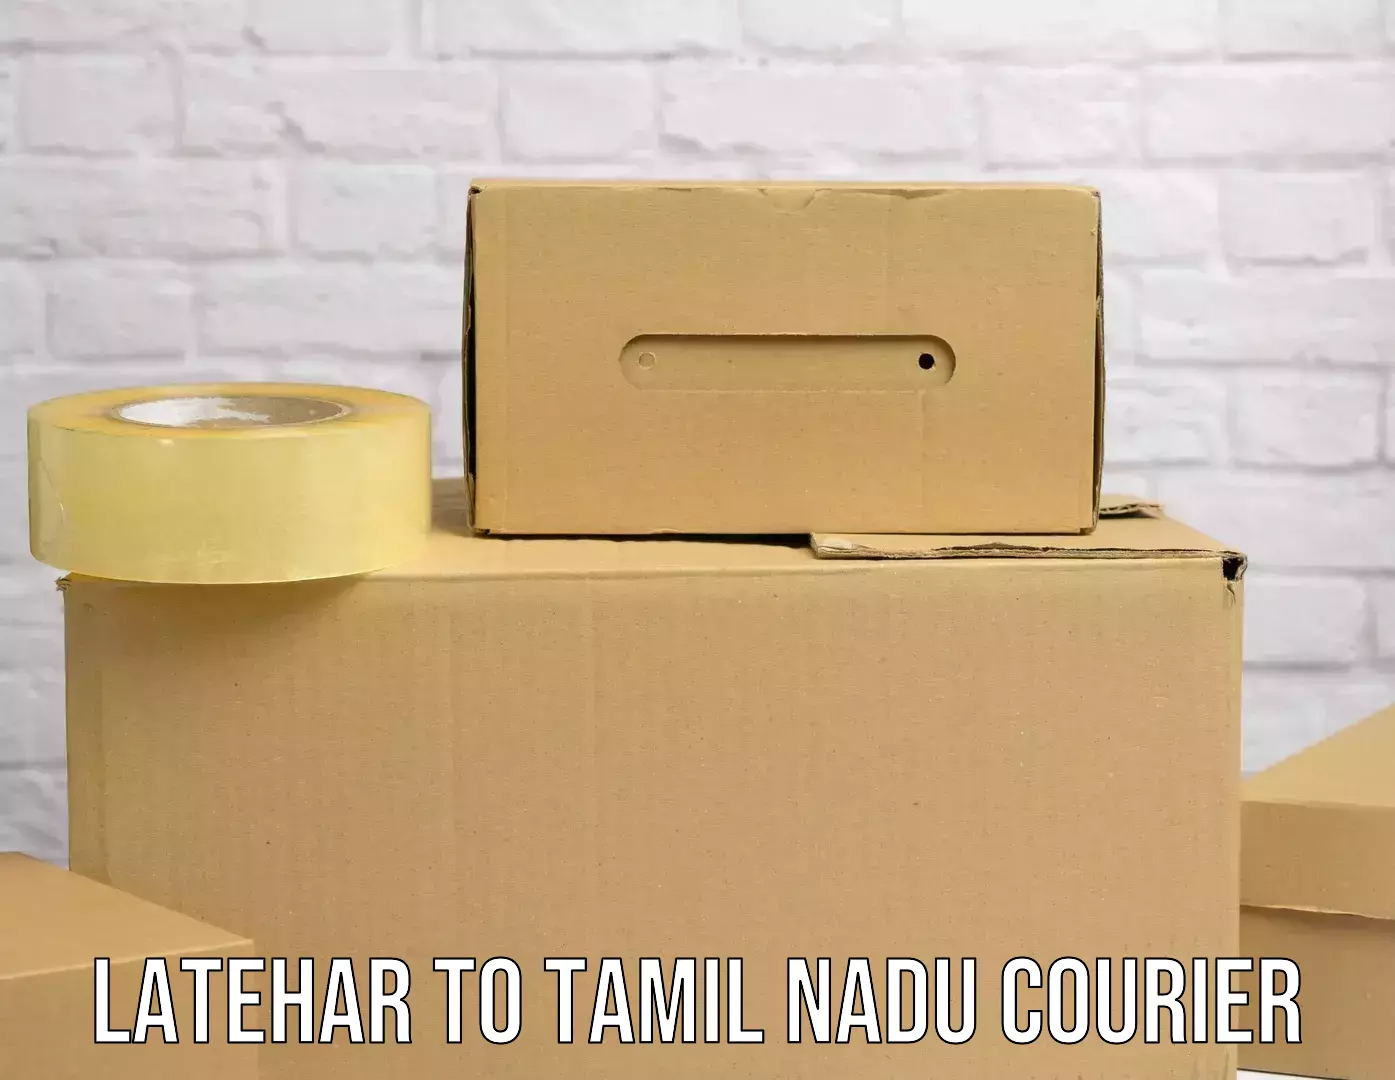 Efficient cargo services Latehar to Vellore Institute of Technology